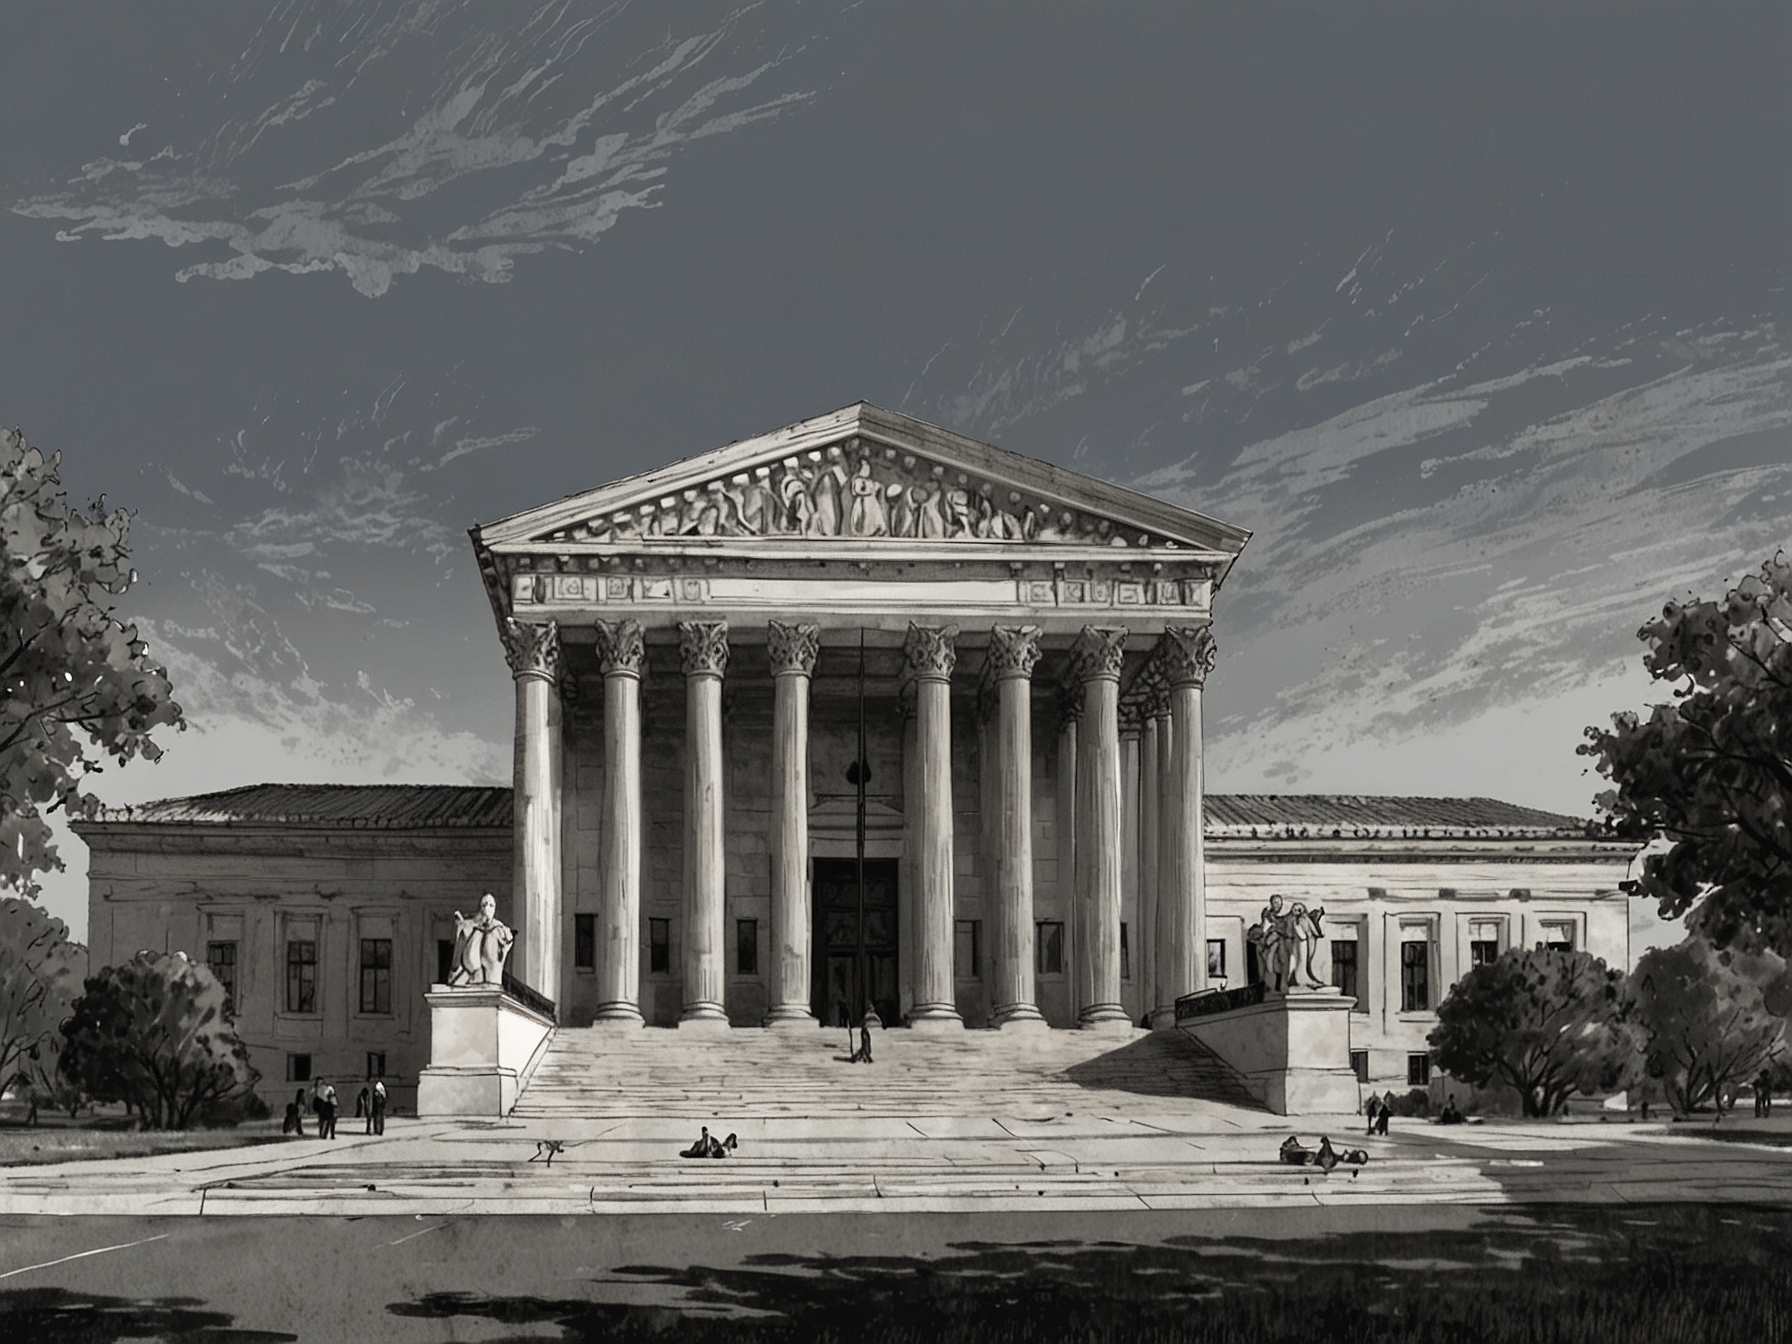 An illustration showing the United States Supreme Court building, symbolizing the legal foundation for Congress to potentially enact a wealth tax to address income inequality.